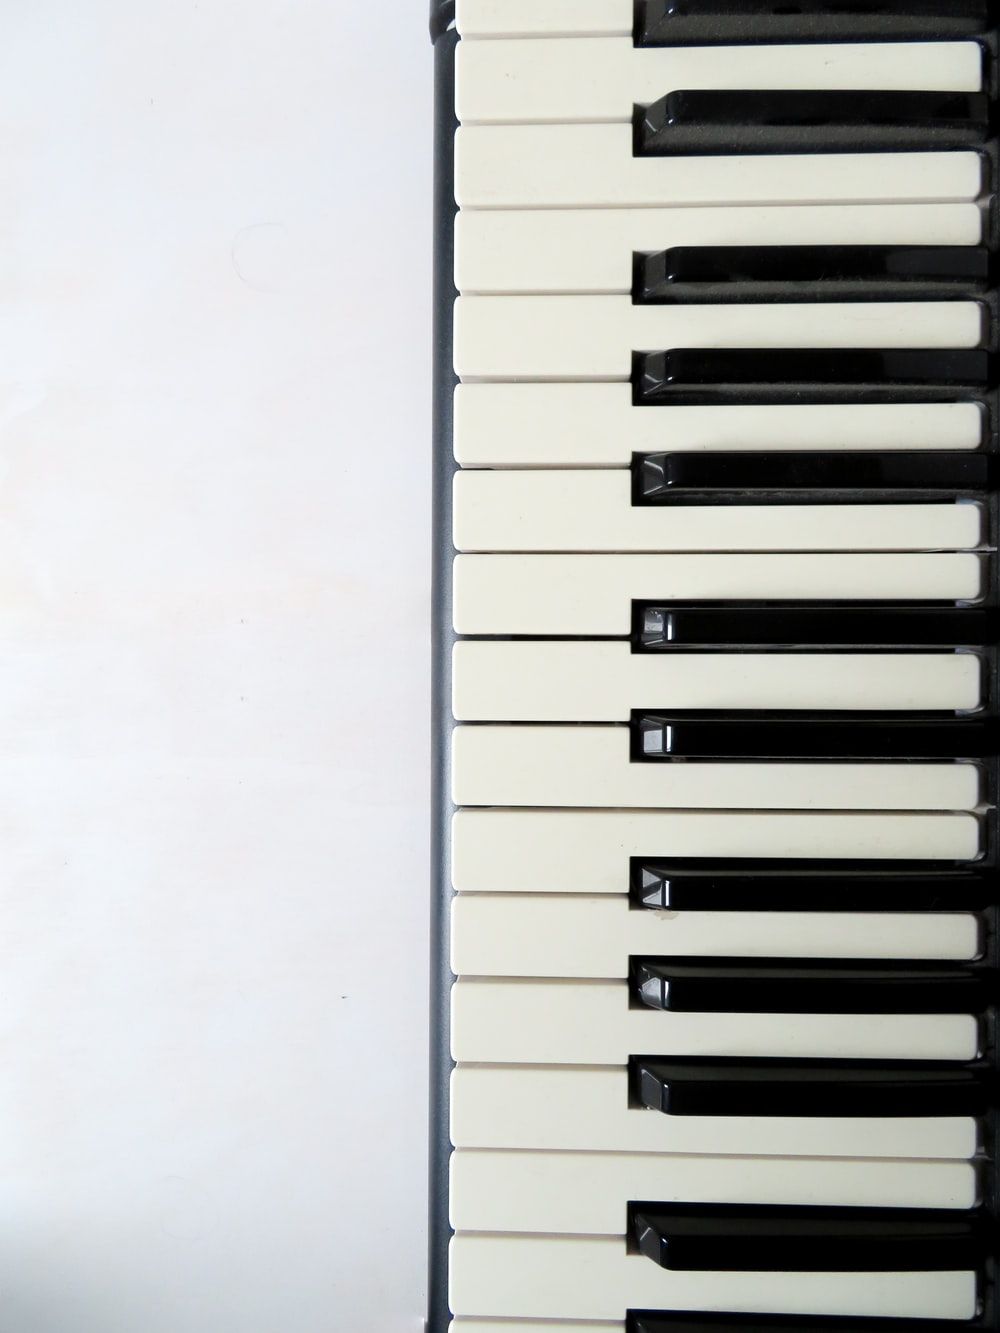 1000x1333 Piano Picture. Download Free Image & Stock Photo on WallpaperBat